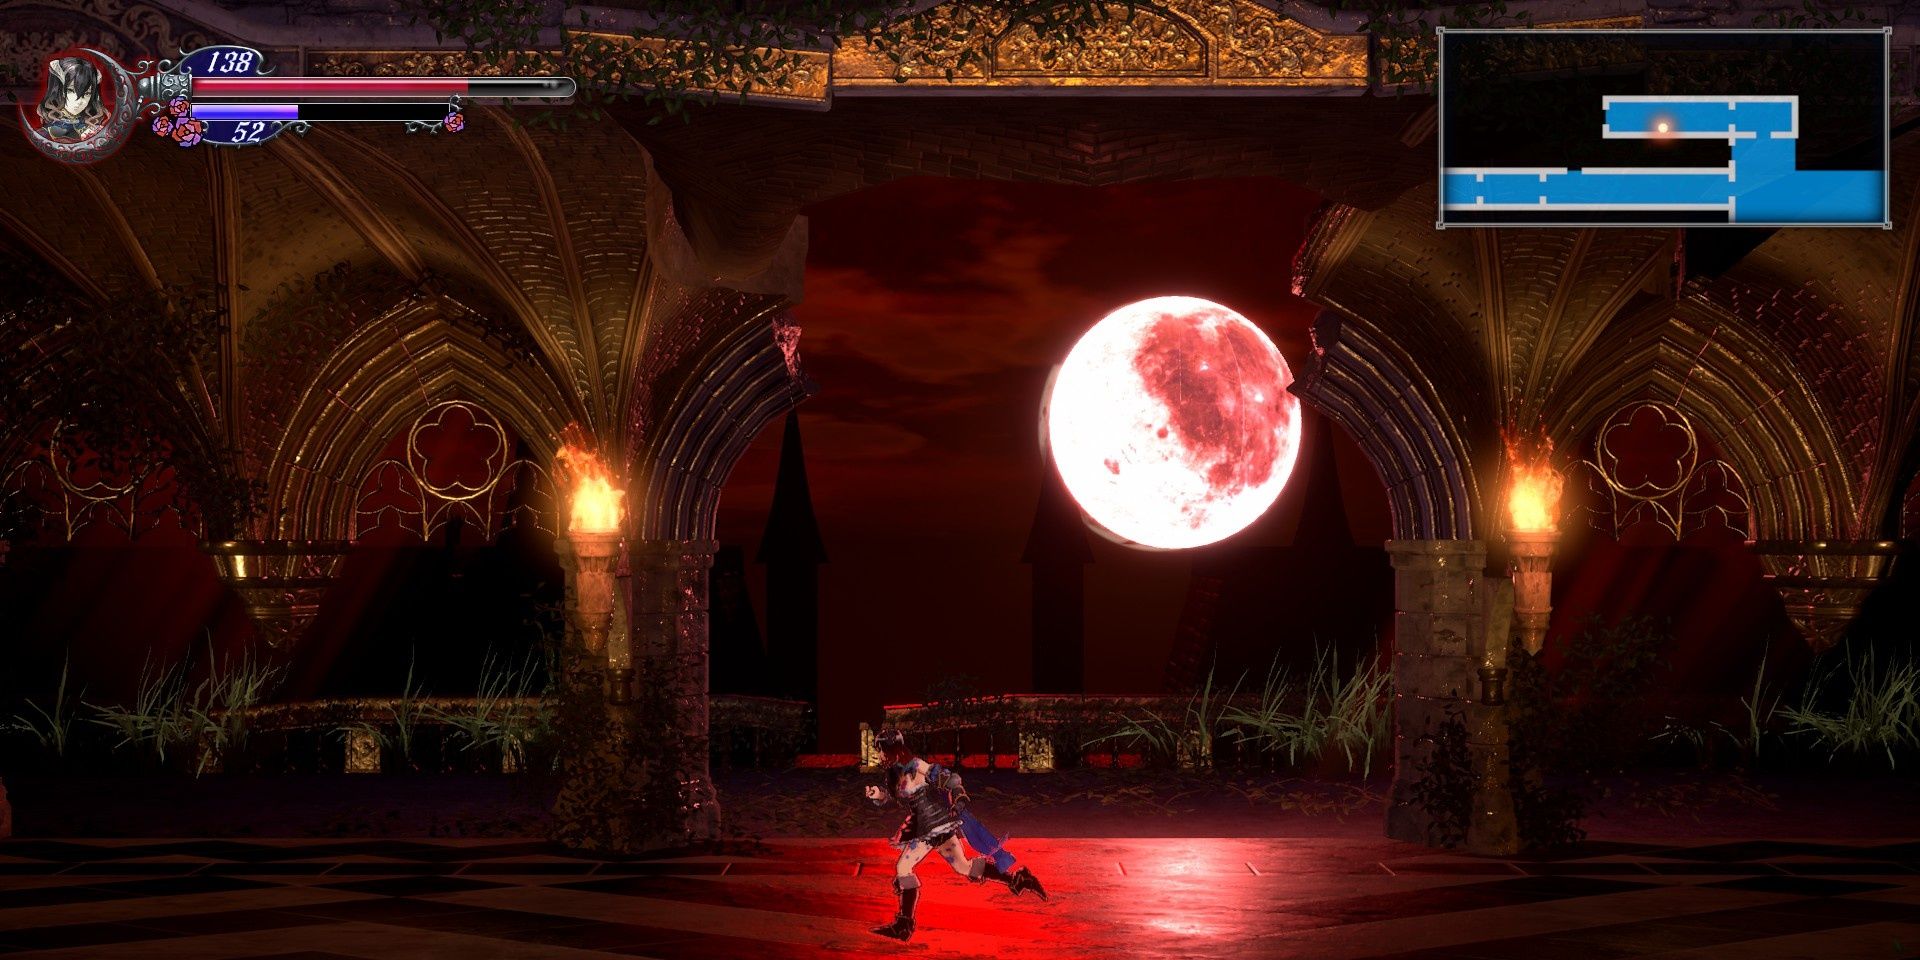 A screenshot showing gameplay in Bloodstained: Ritual of the Night